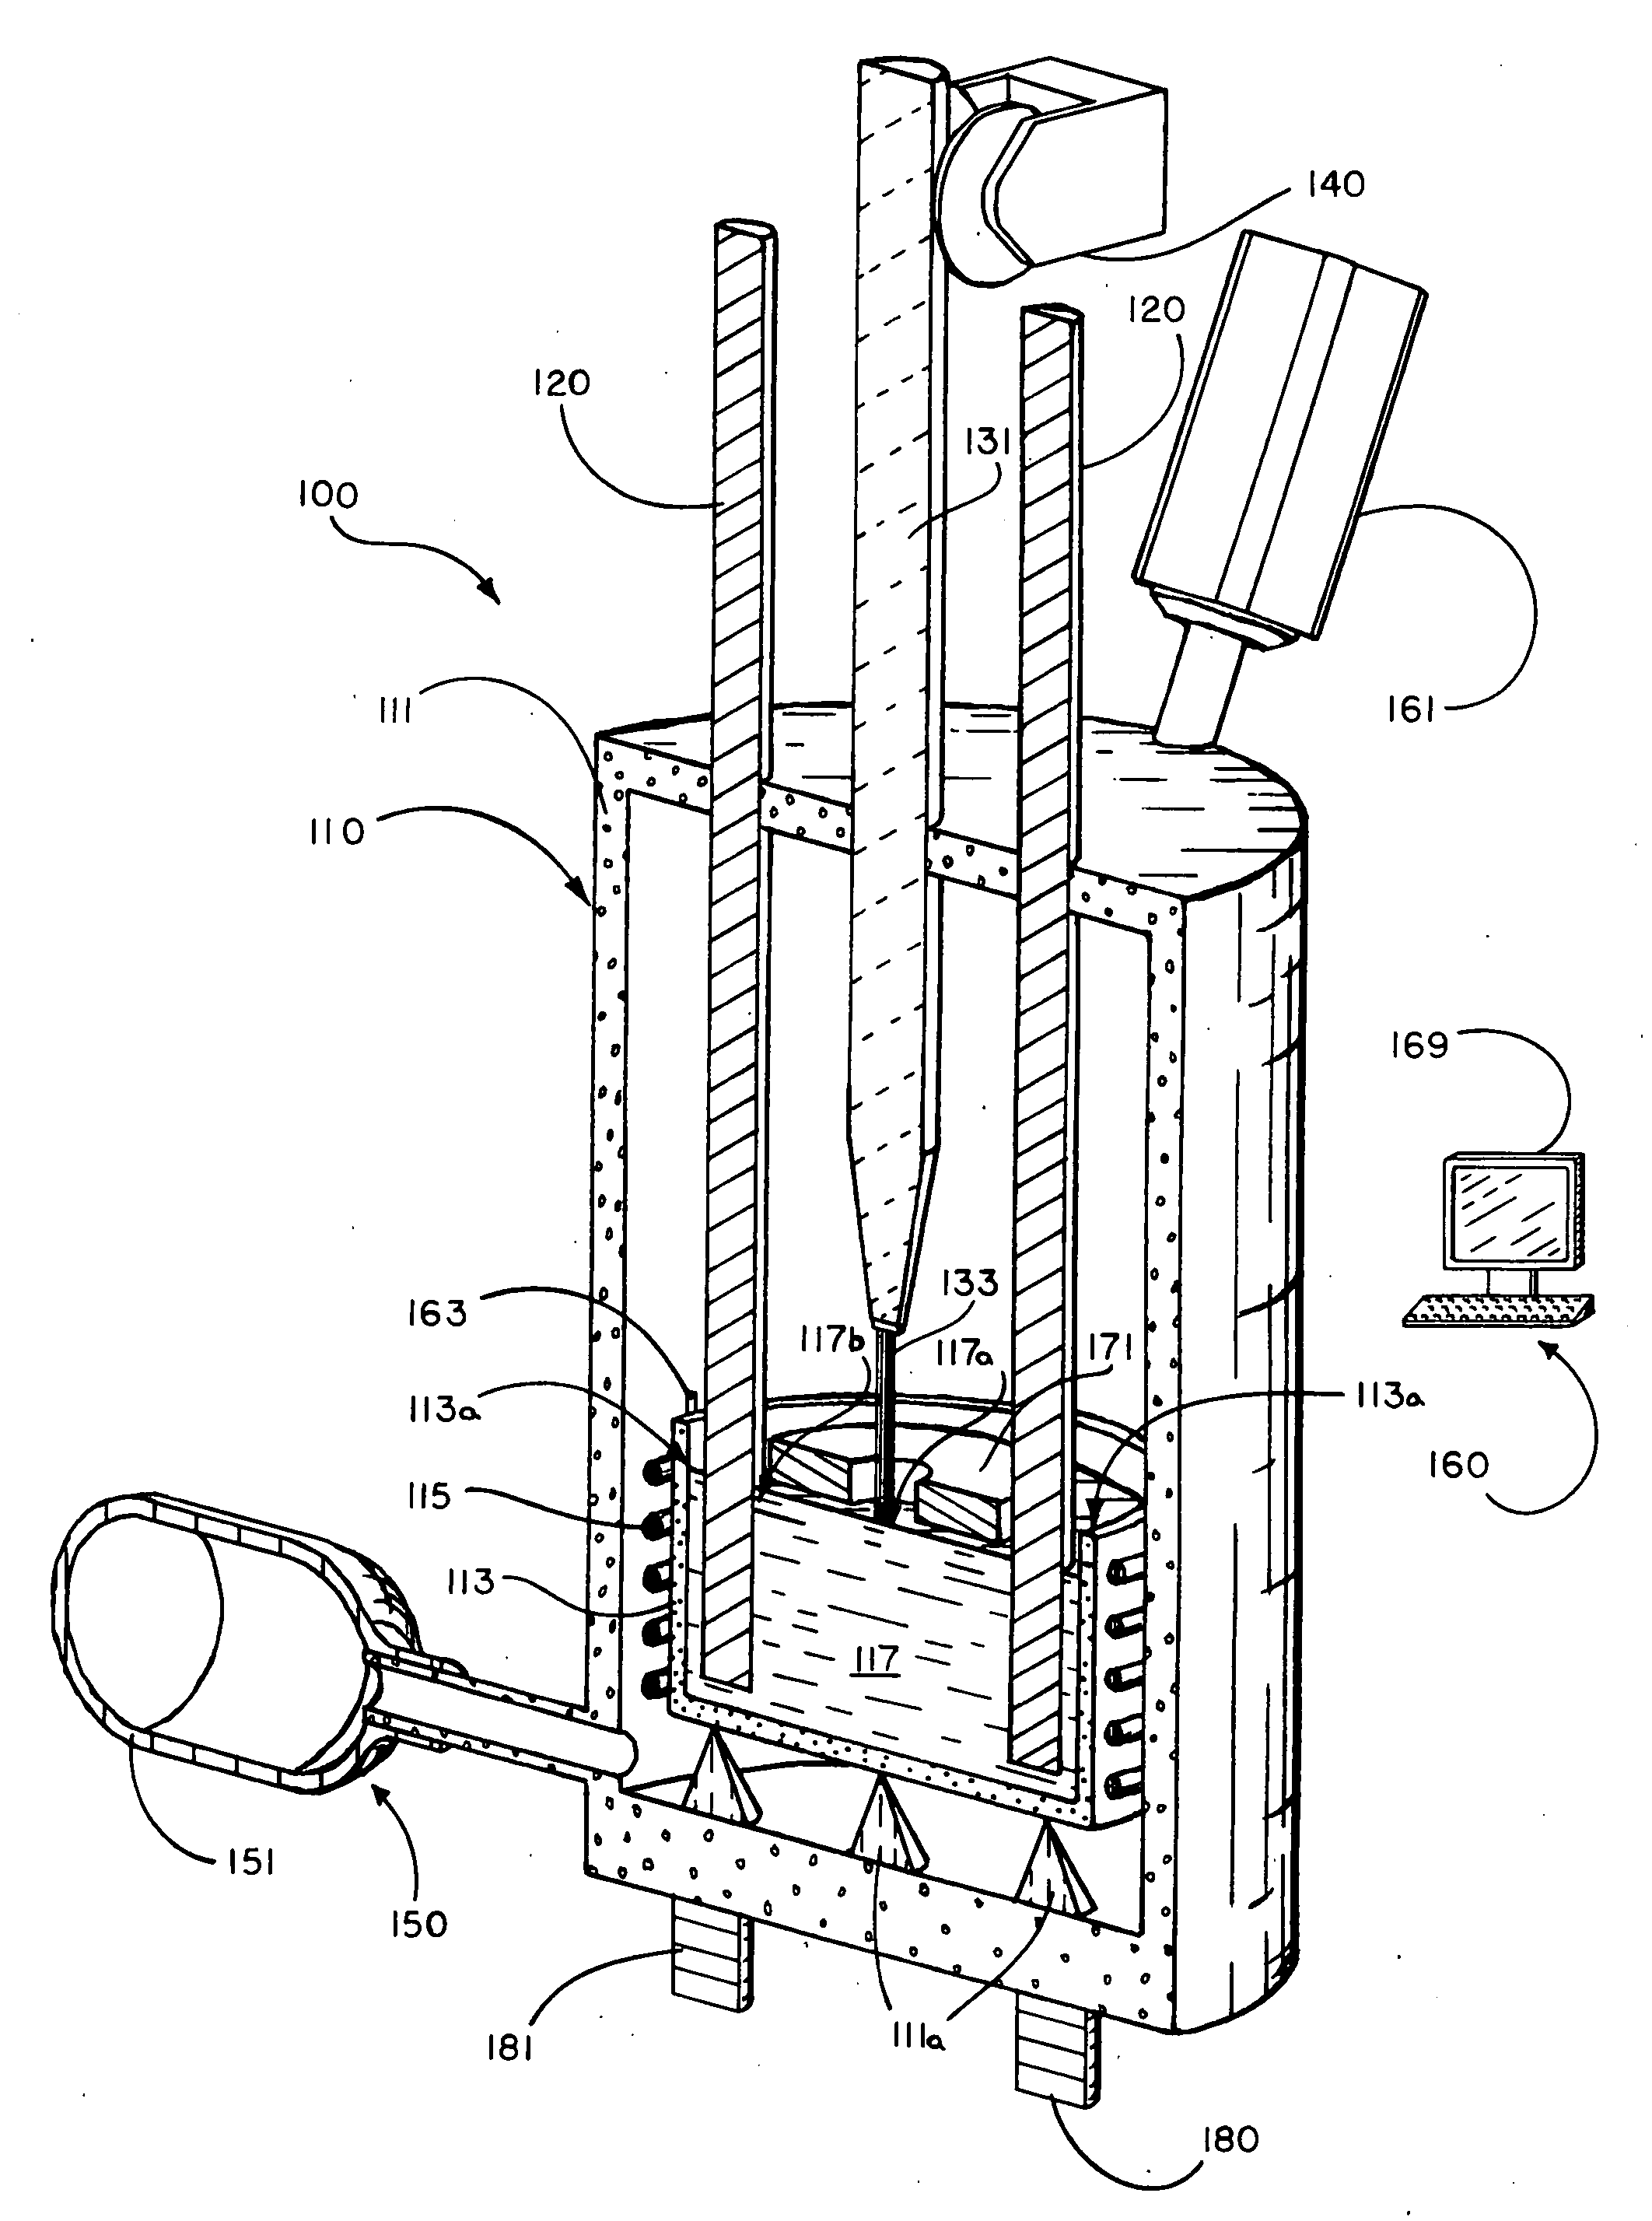 System and method for manufacturing carbon nanotubes